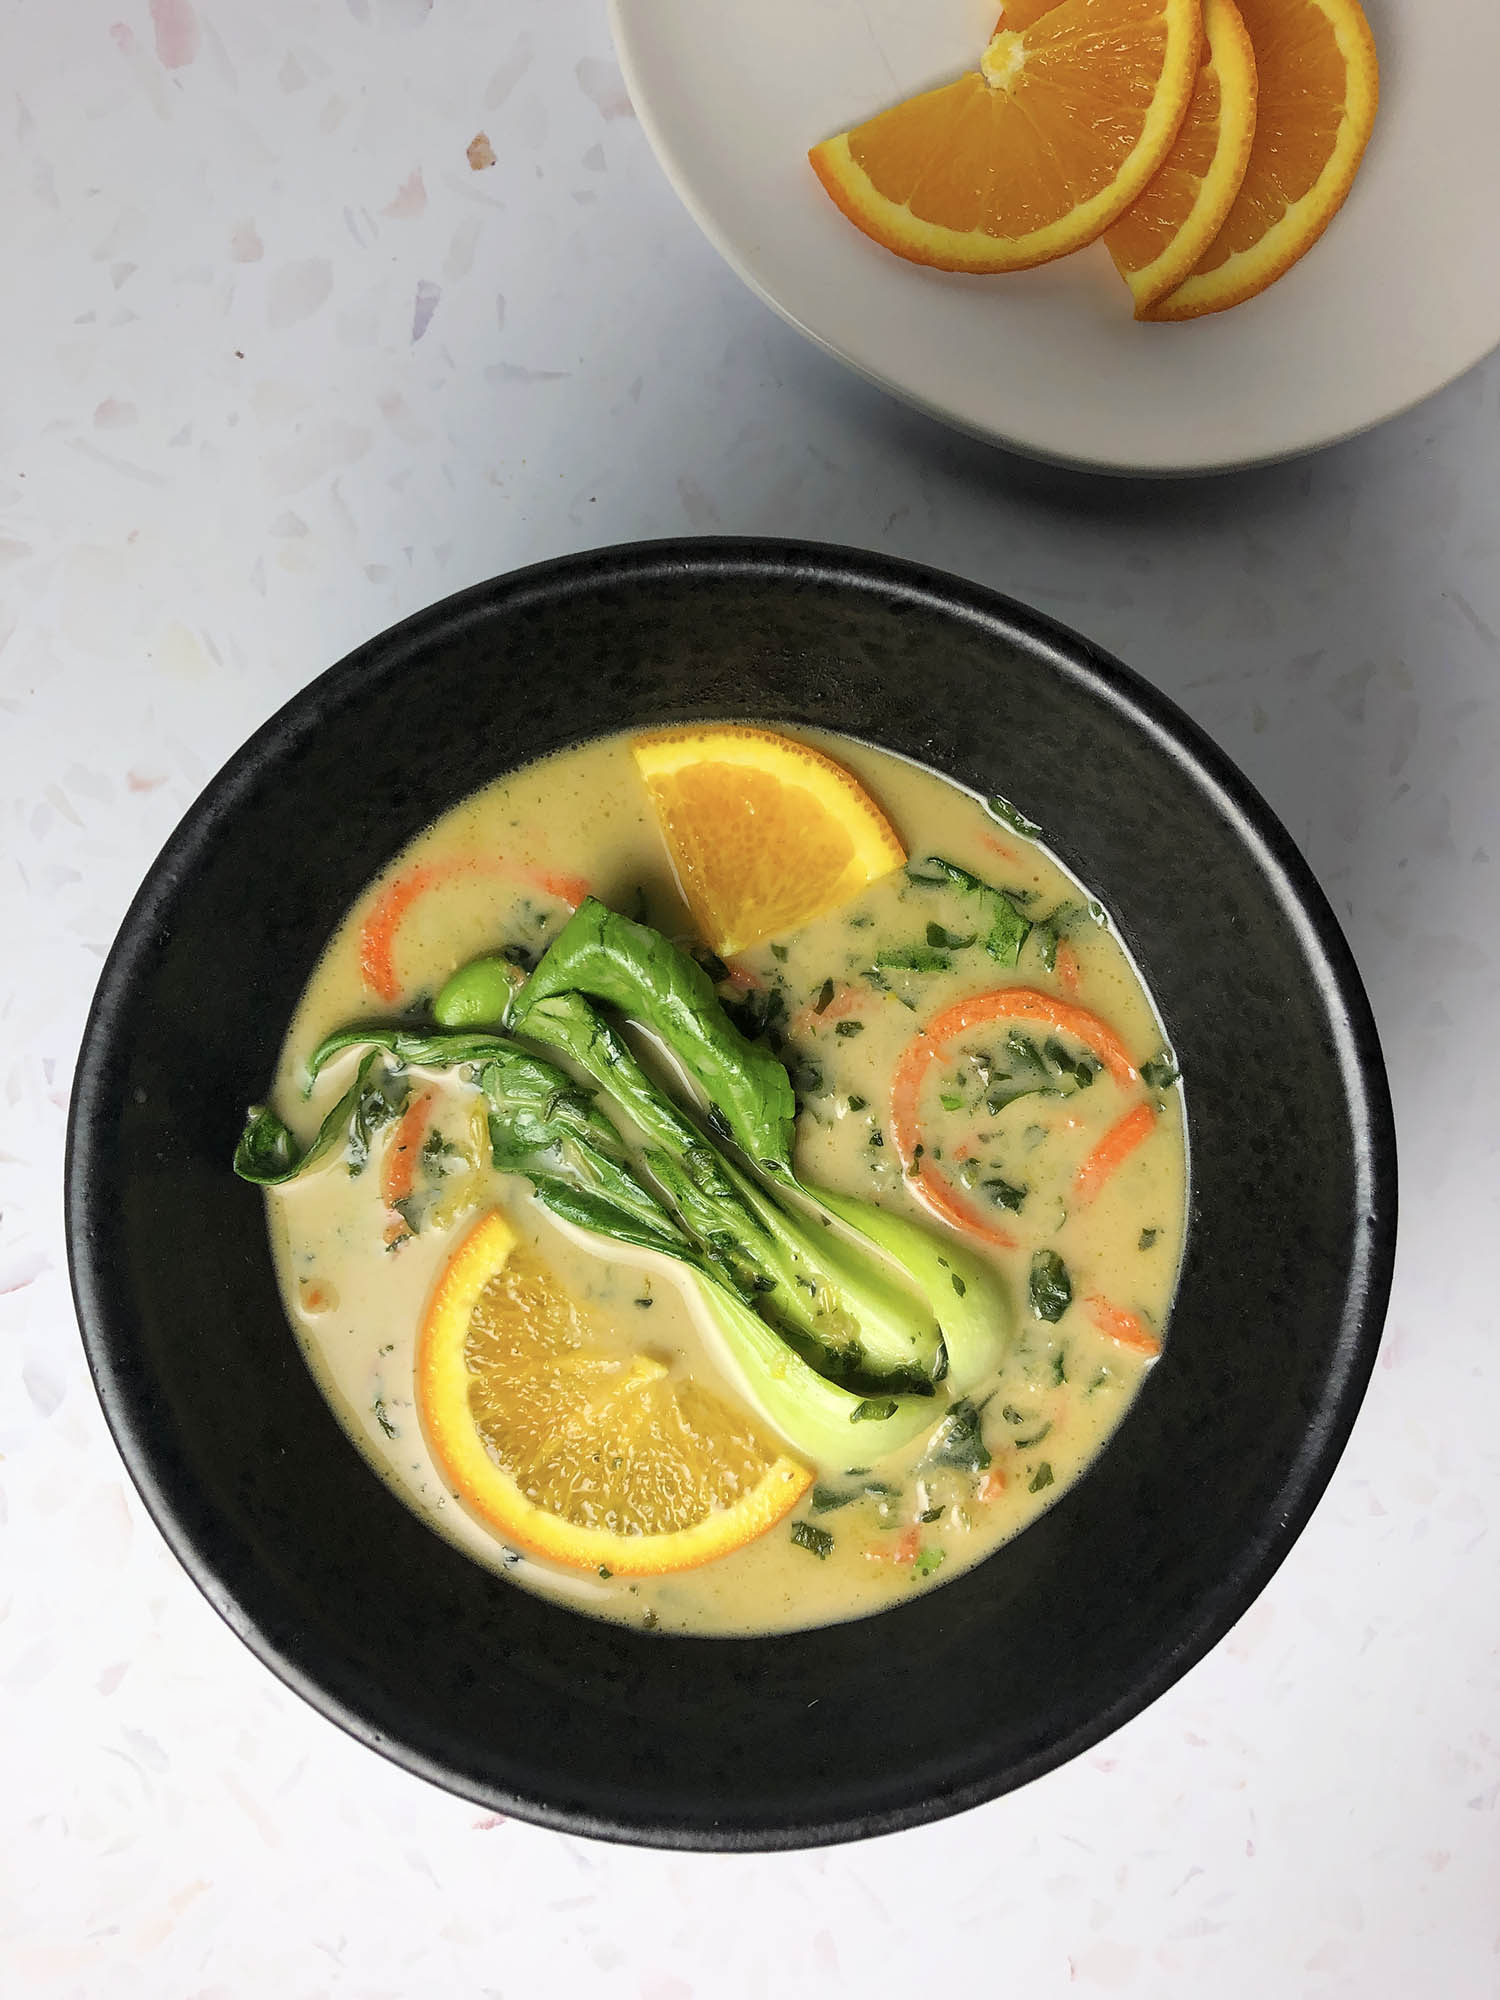 Top-down shot of Thai Green Curry in a black bowl, garnished with bok choy and oranges slices